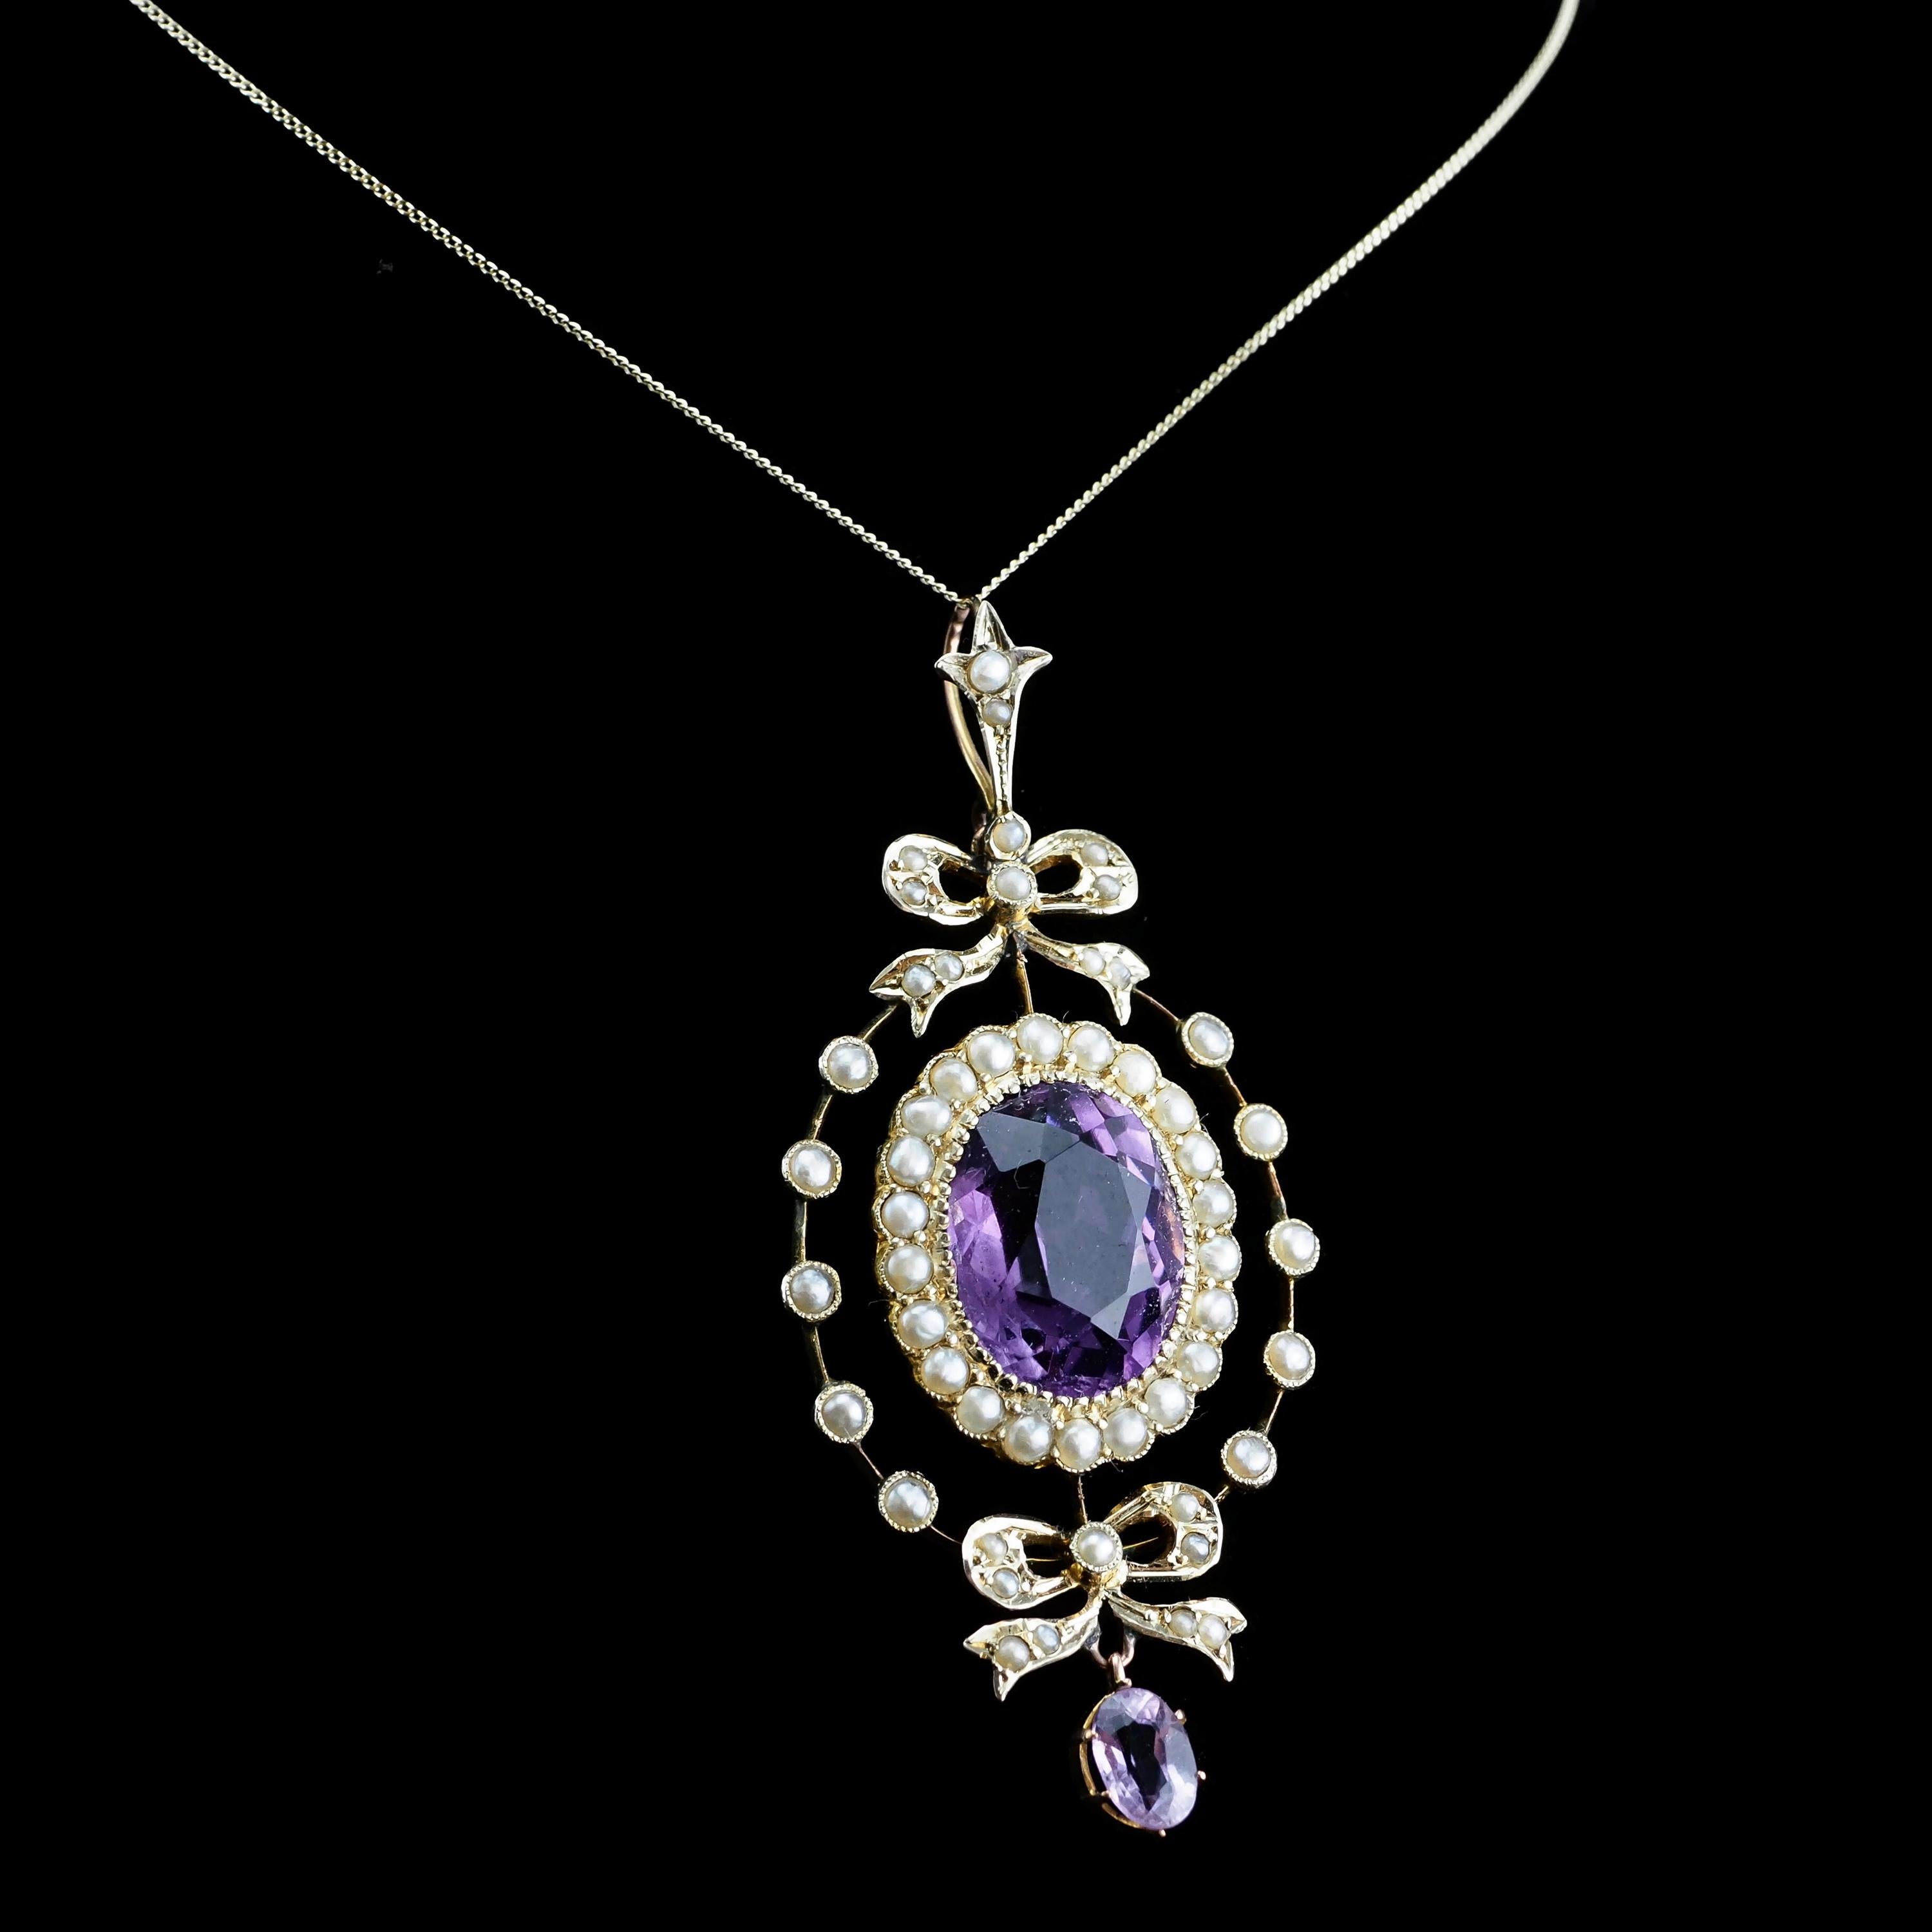 Antique Edwardian Amethyst & Seed Pearl 9k Gold Necklace Pendant, circa 1905 3